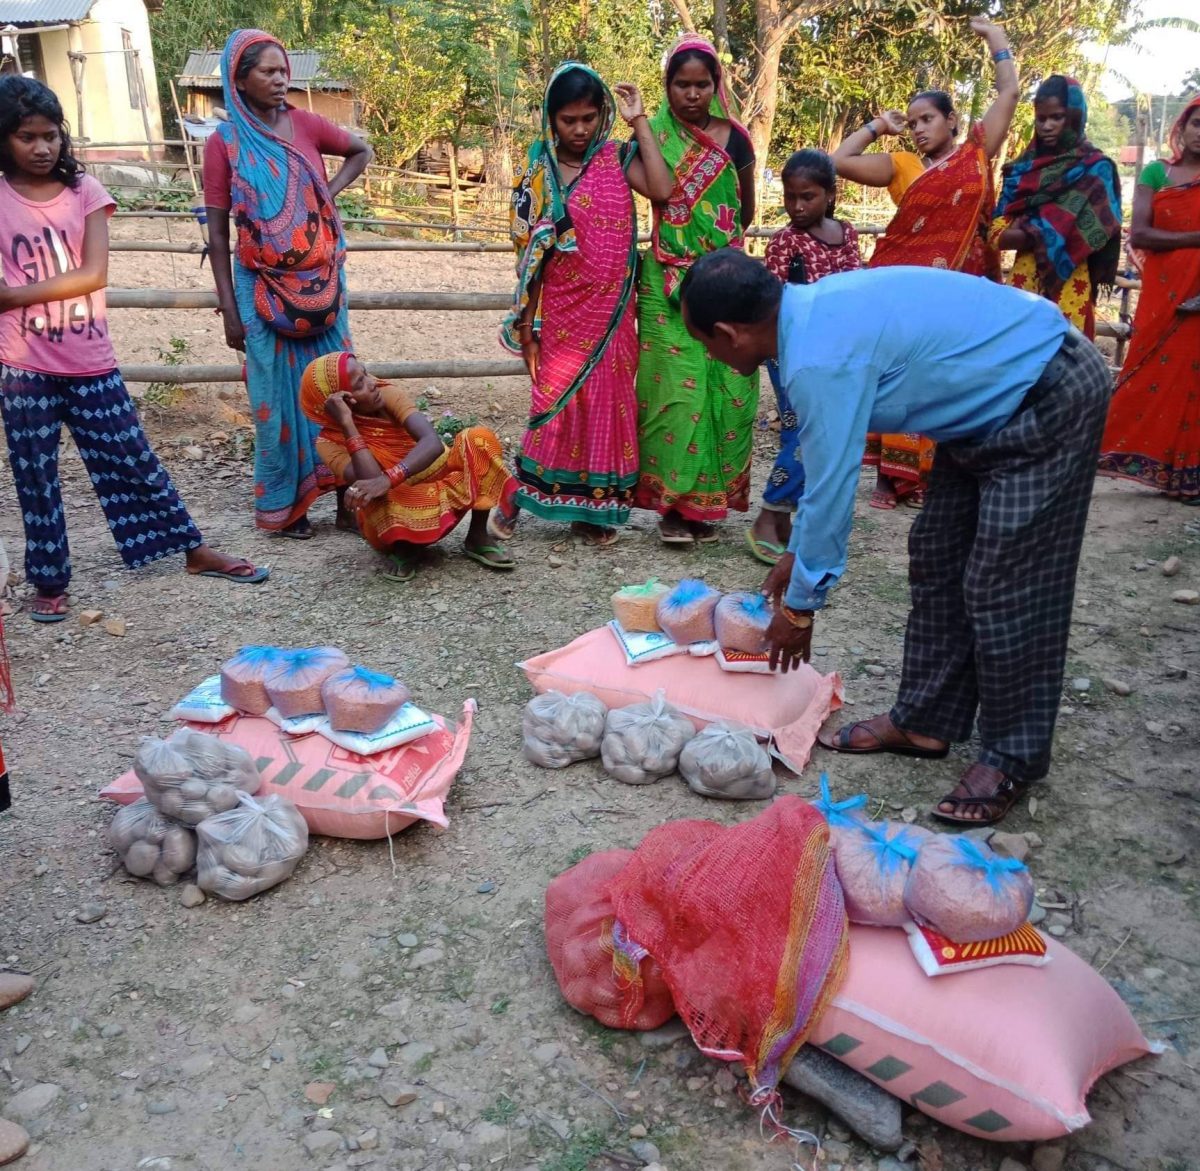 Man bending over relief supplies on the ground and women standing behind.